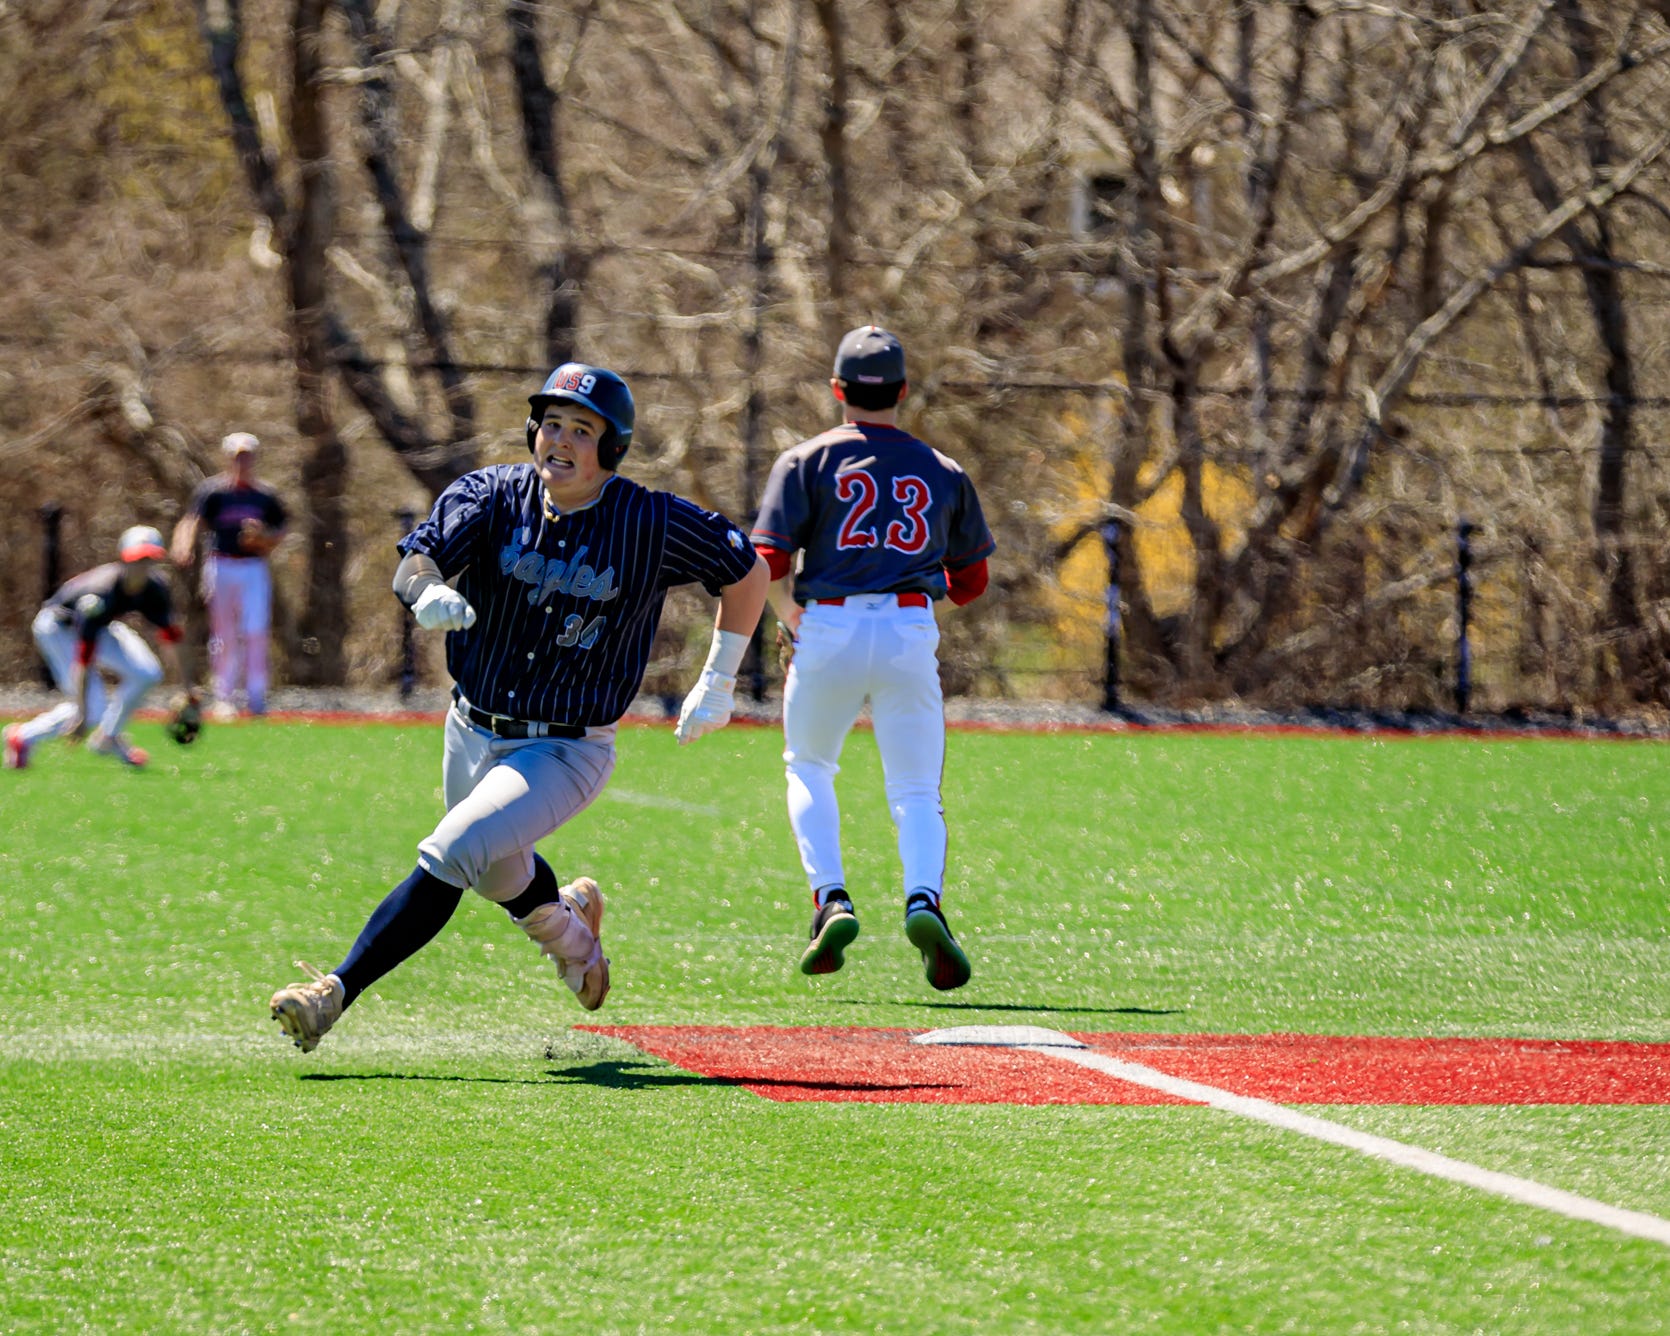 George Slauson rounds second base as he heads to third.